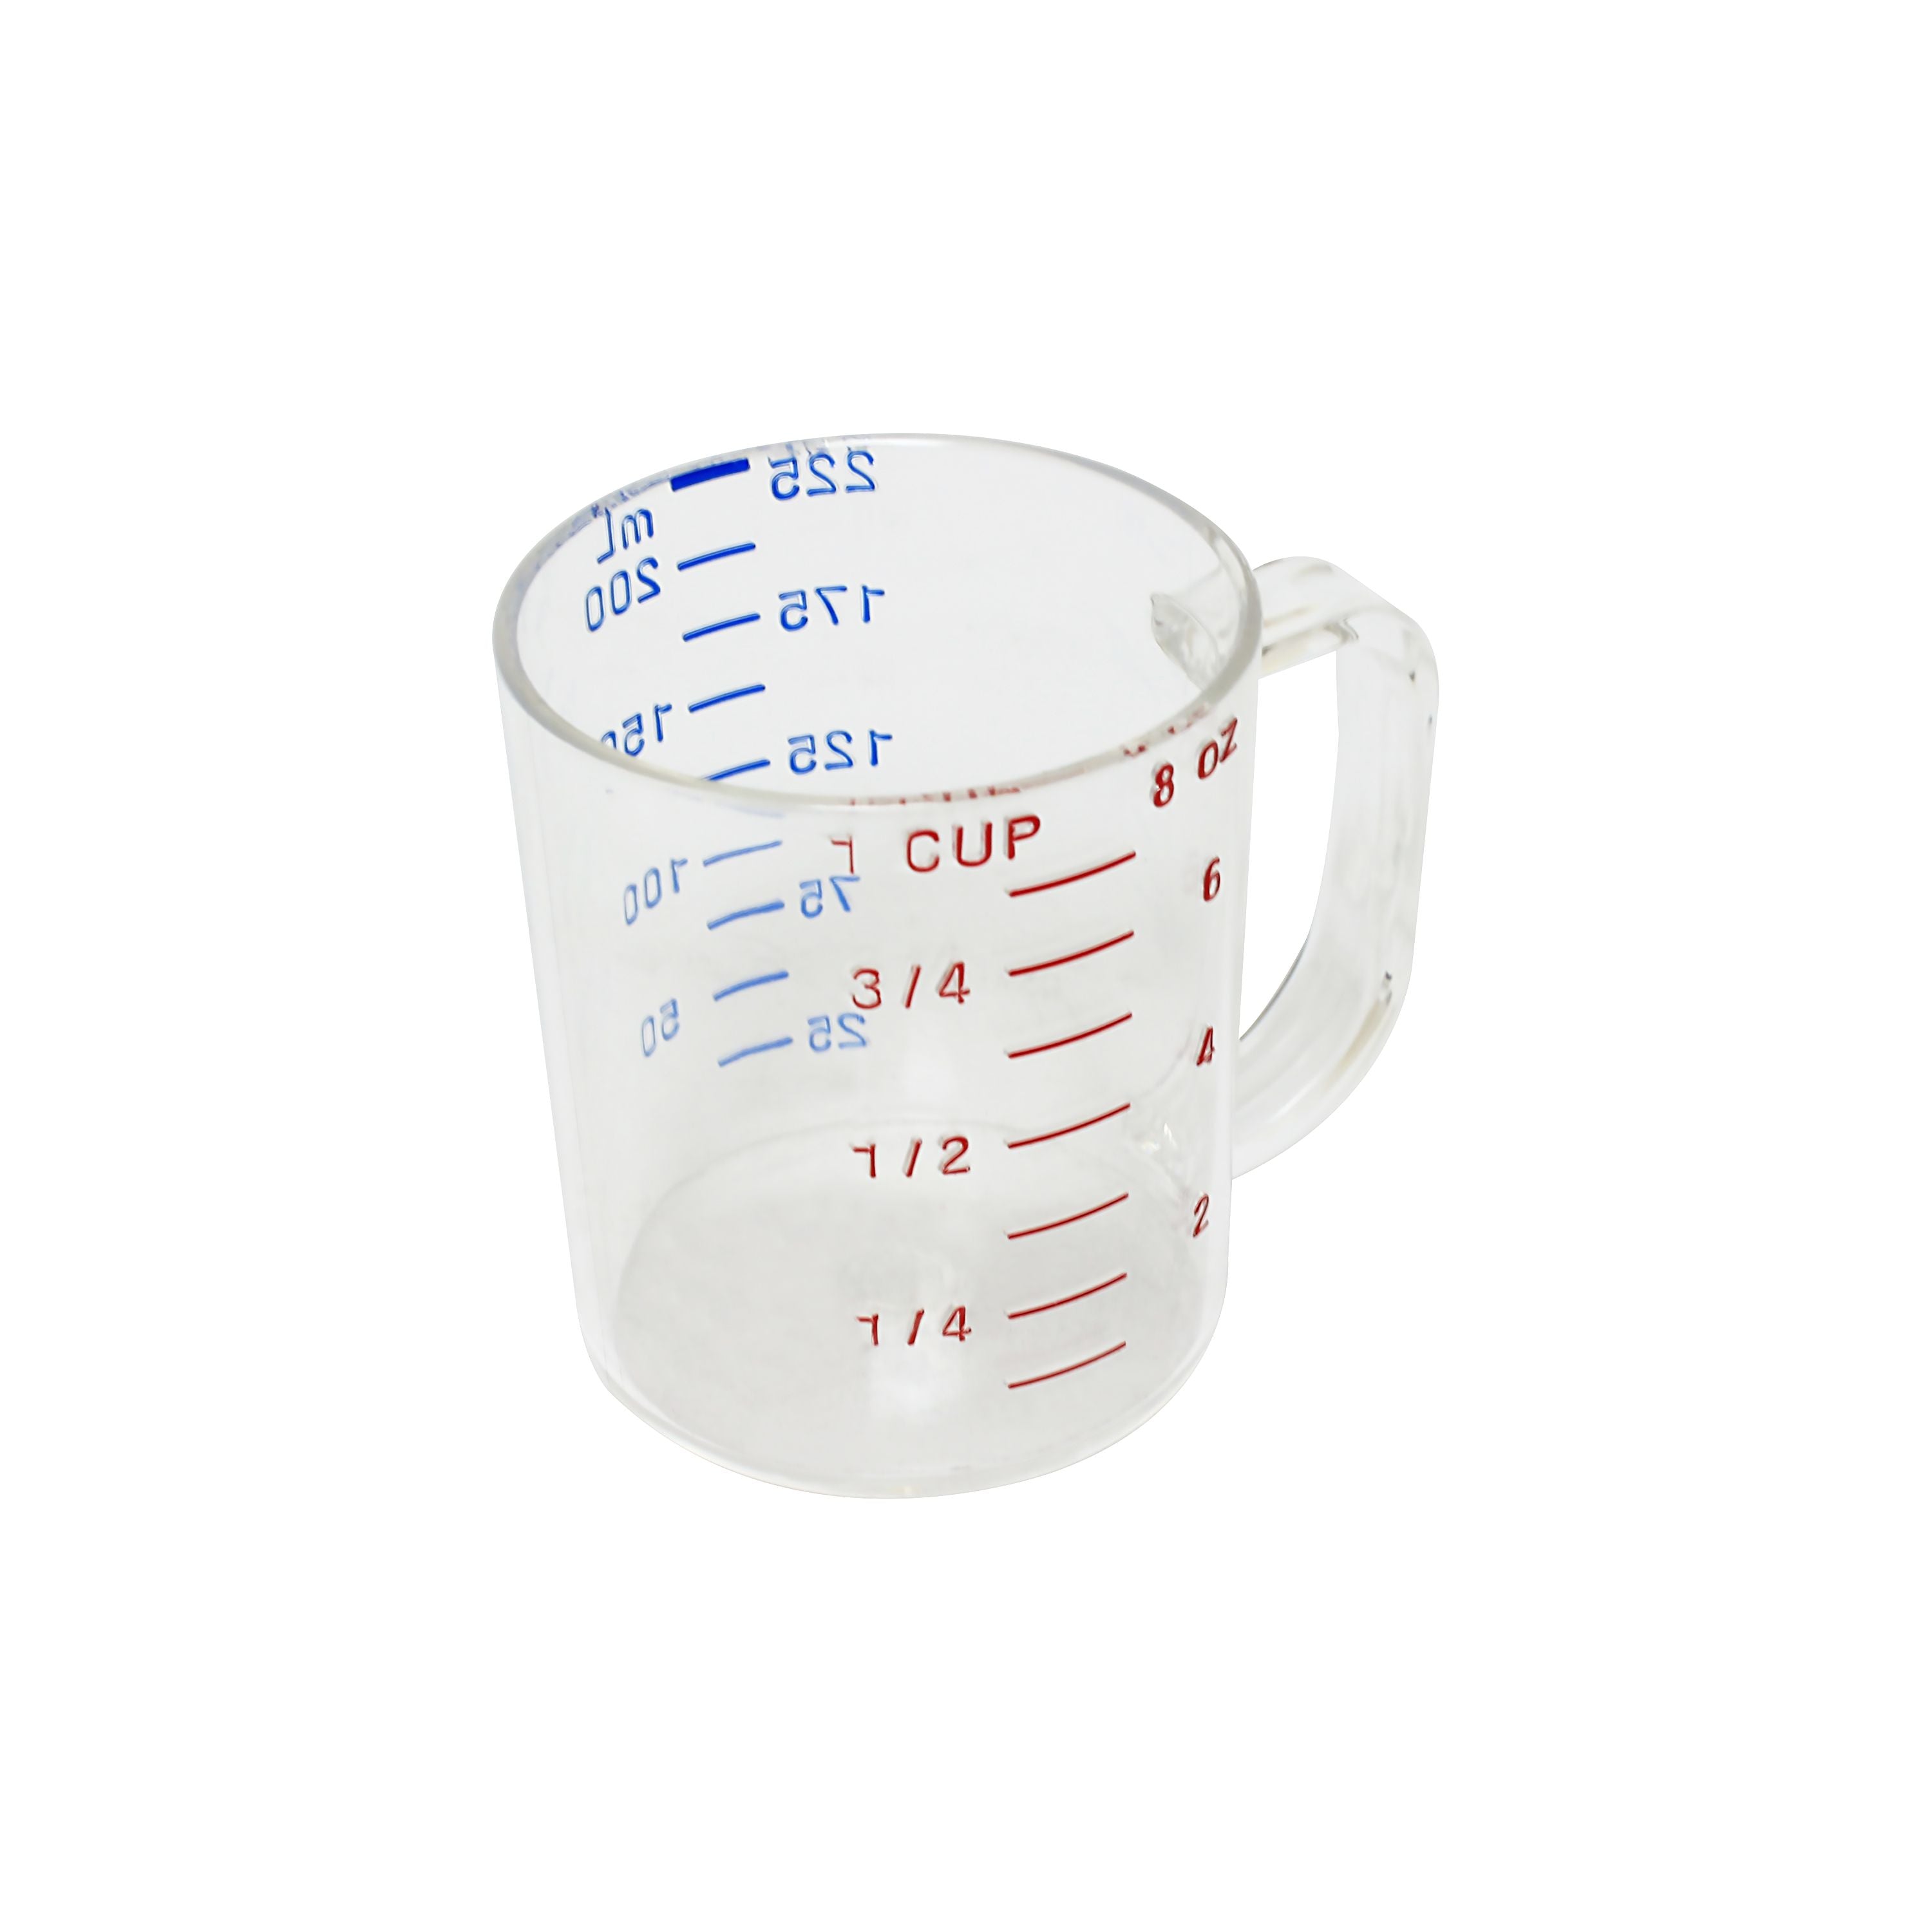 Thunder Group PLMC008CL Heavy Weight 1 CUP/ 0.25L Polycarbonate Measuring Cup